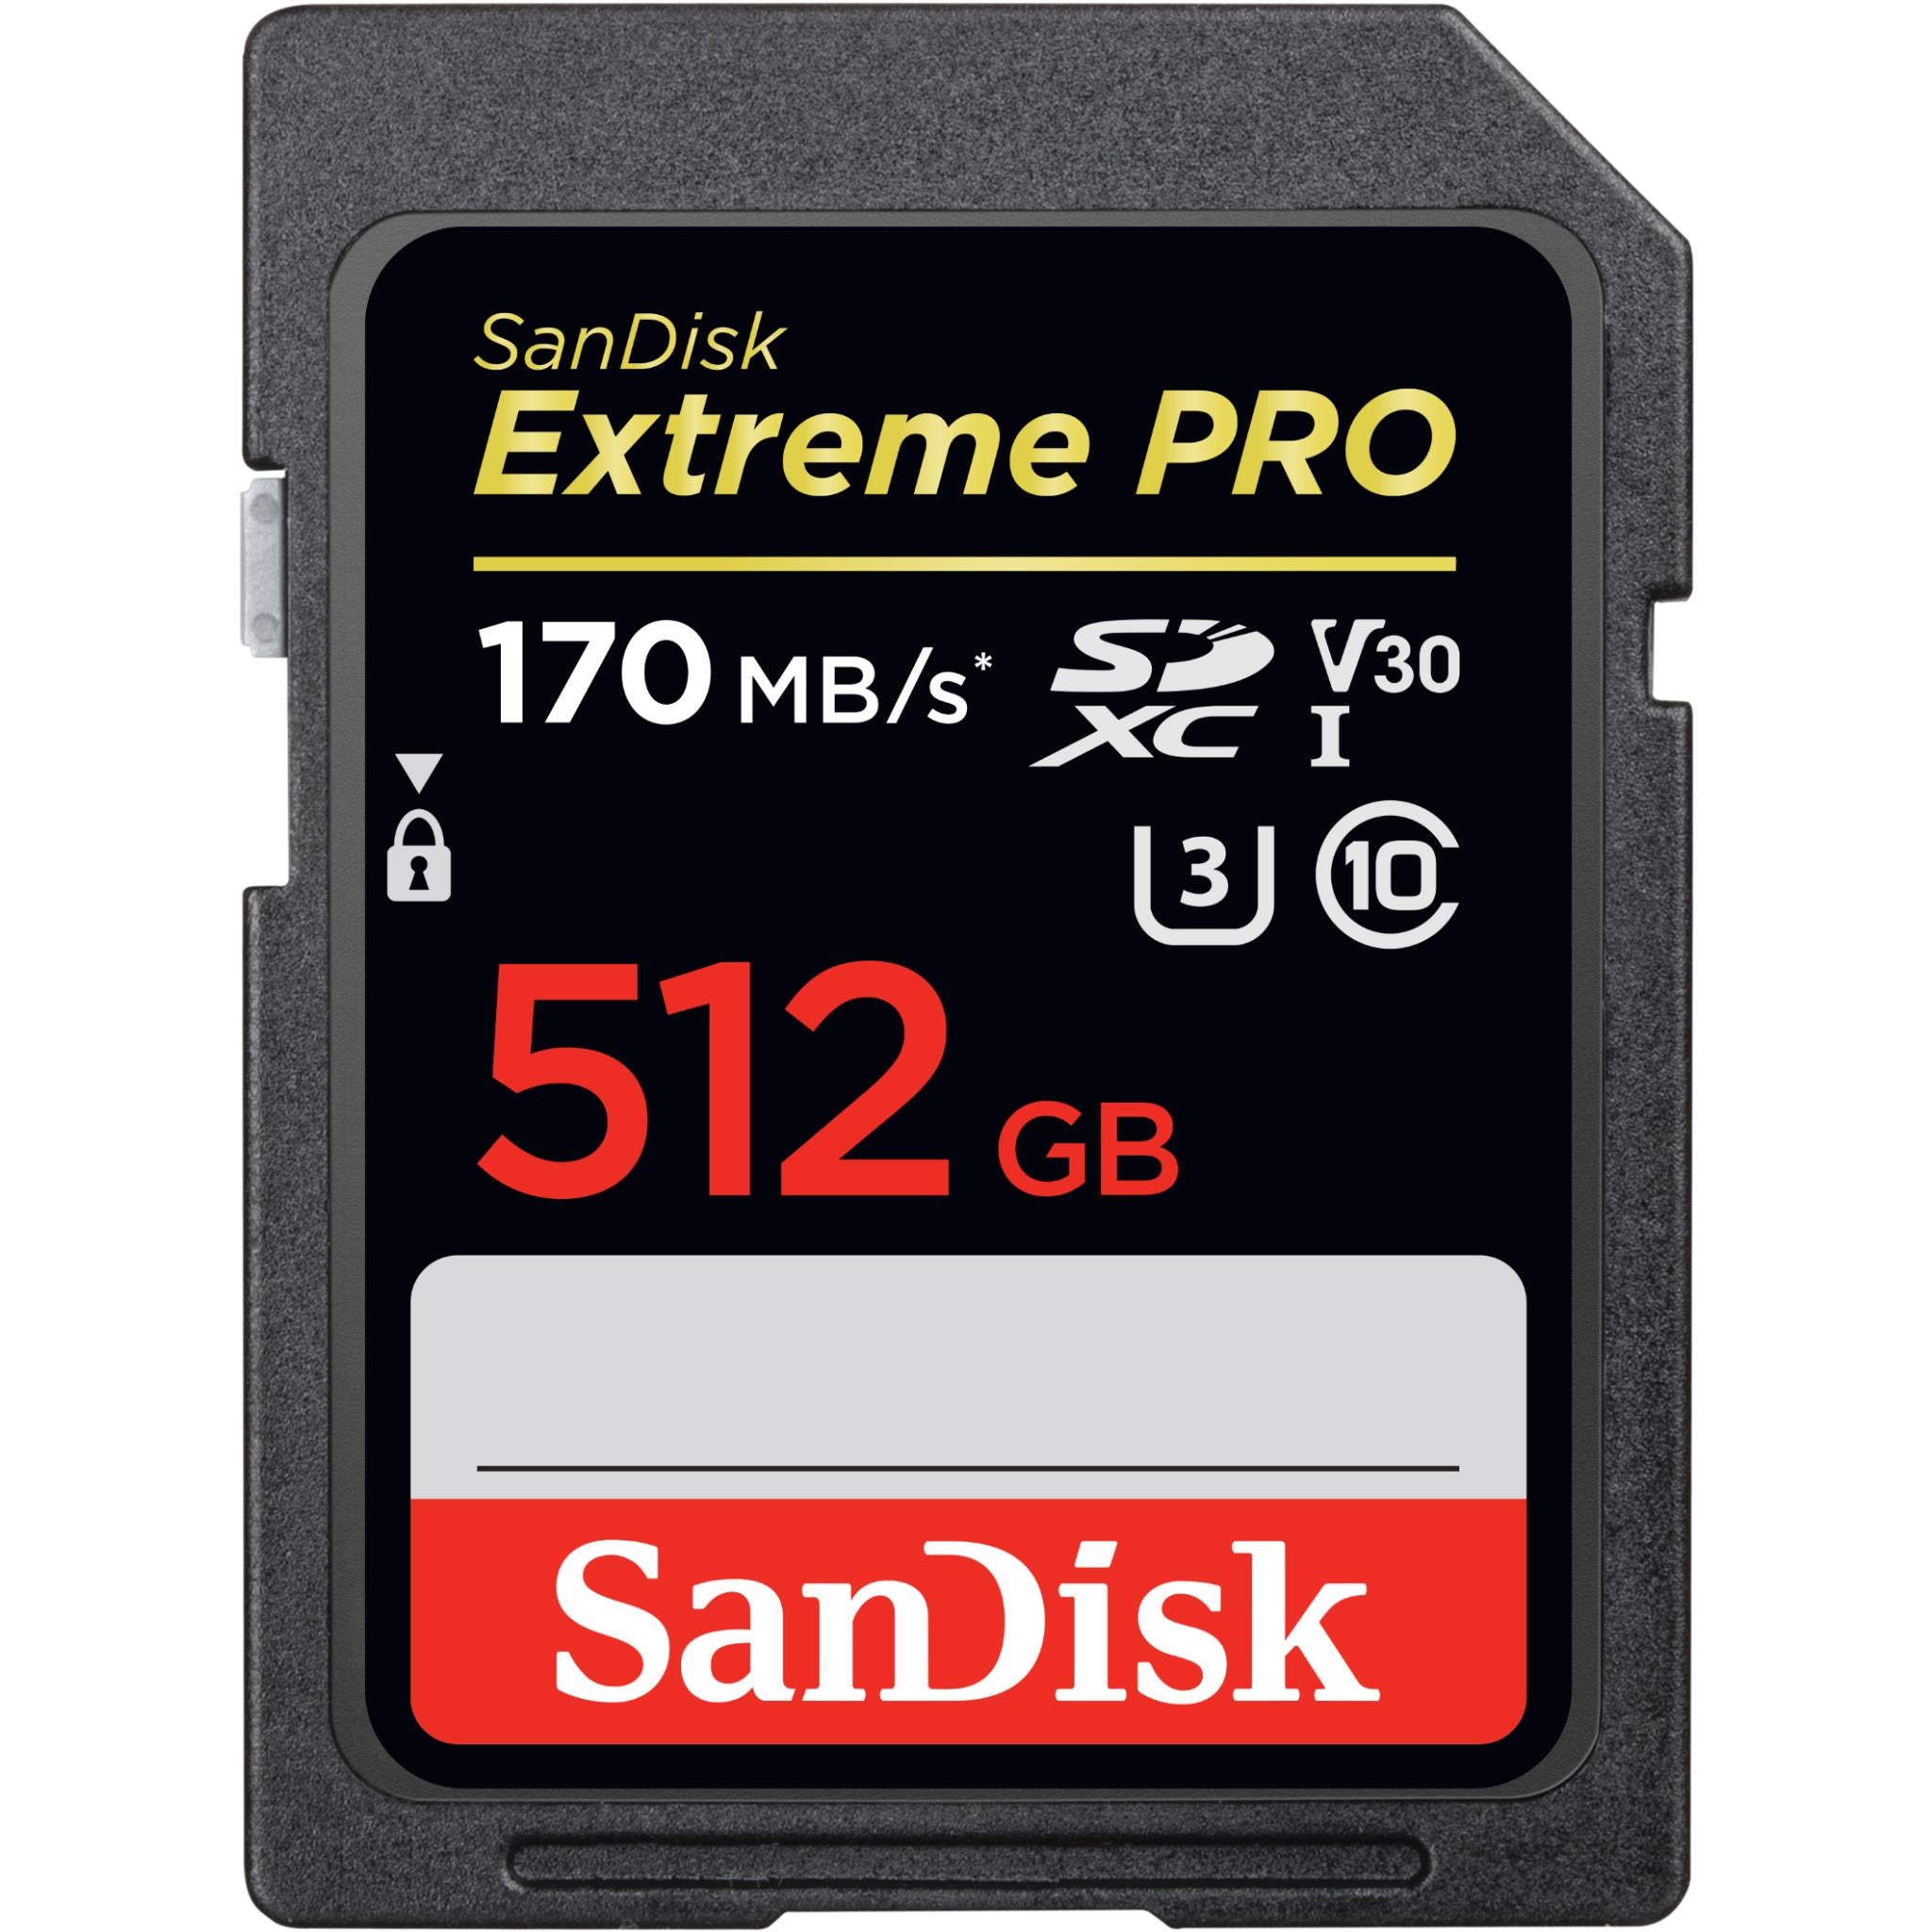 sandisk extreme pro sdxc 512gb 170mb/s memory card